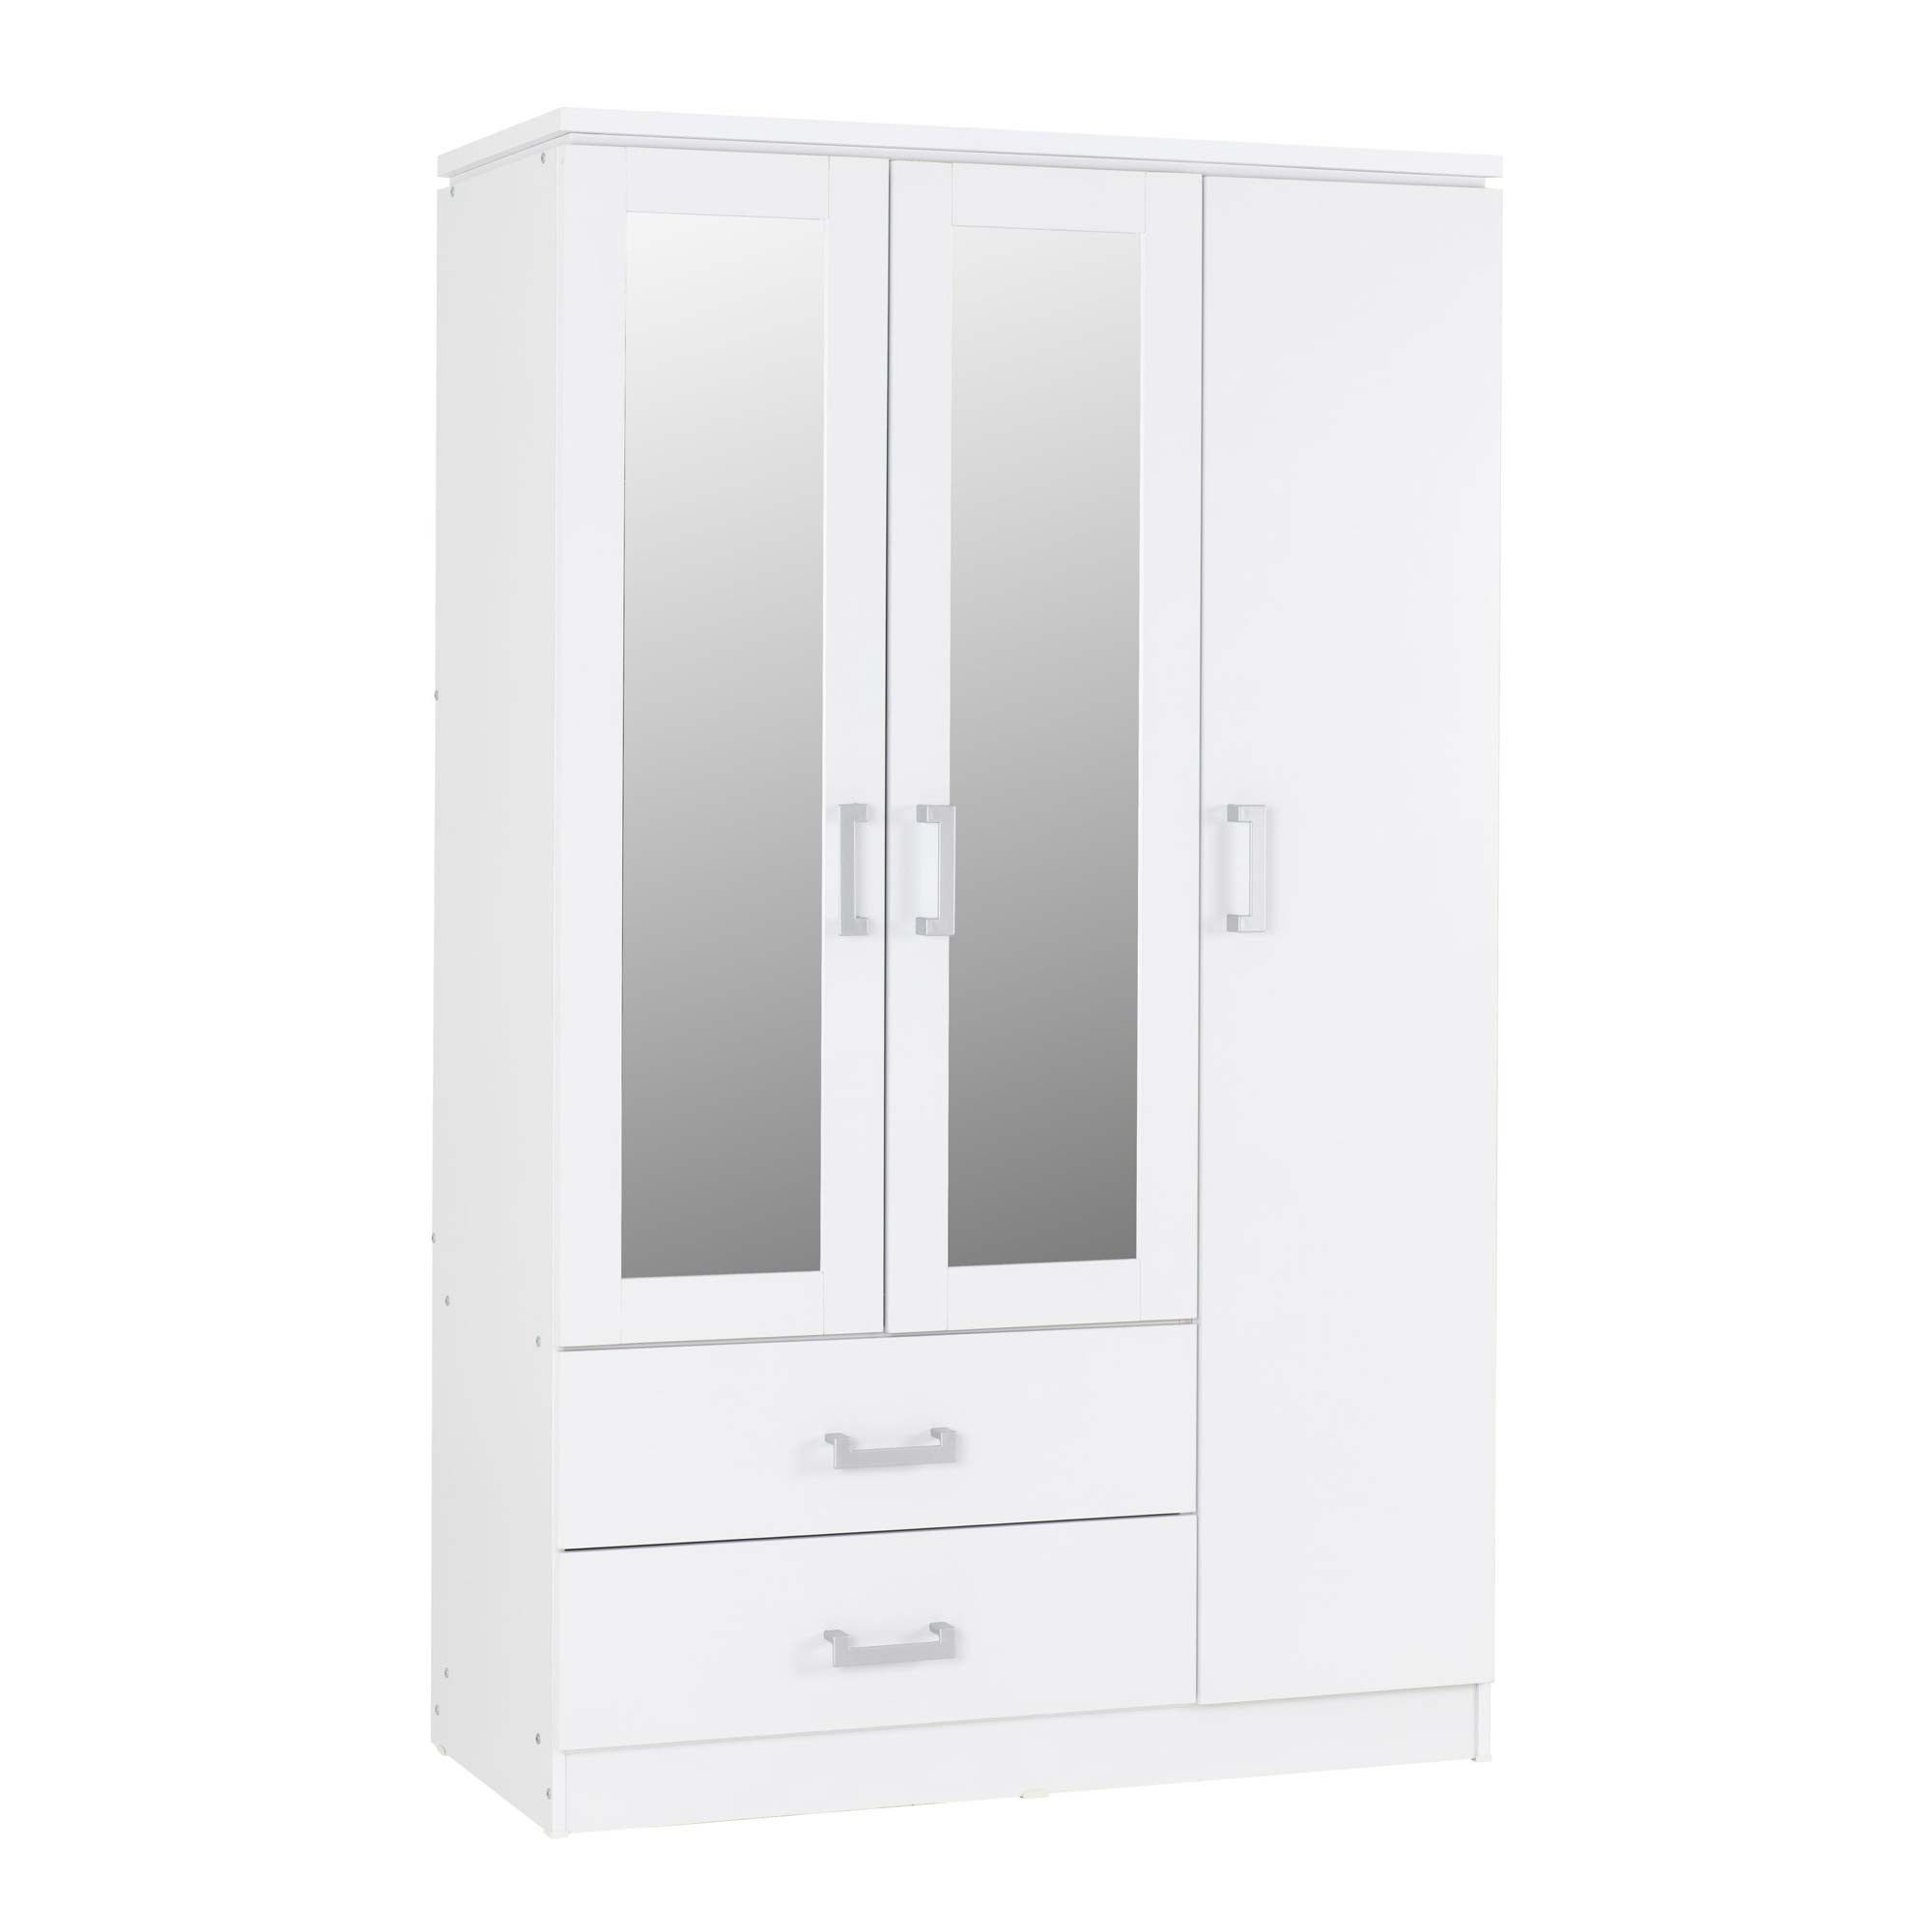 Charles White 3 Door 2 Drawer Wardrobe | Wardrobes | Bedroom Storage Intended For White 3 Door Wardrobes With Drawers (Photo 12 of 15)